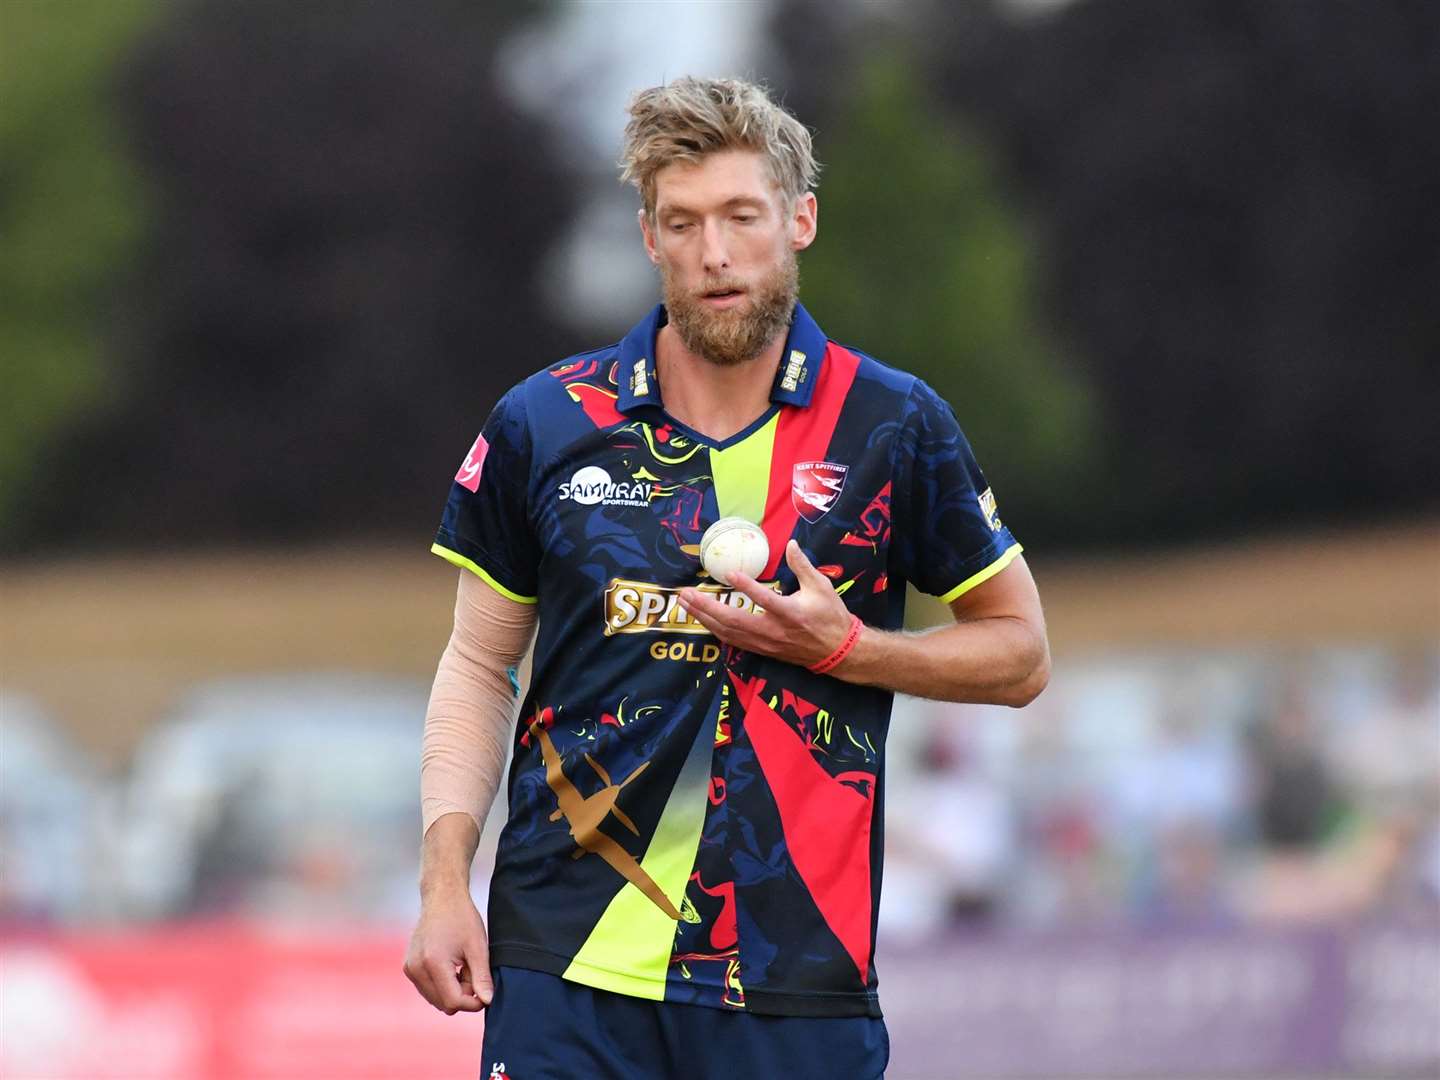 Calum Haggett in T20 action for Kent in 2018. Image by Keith Gillard